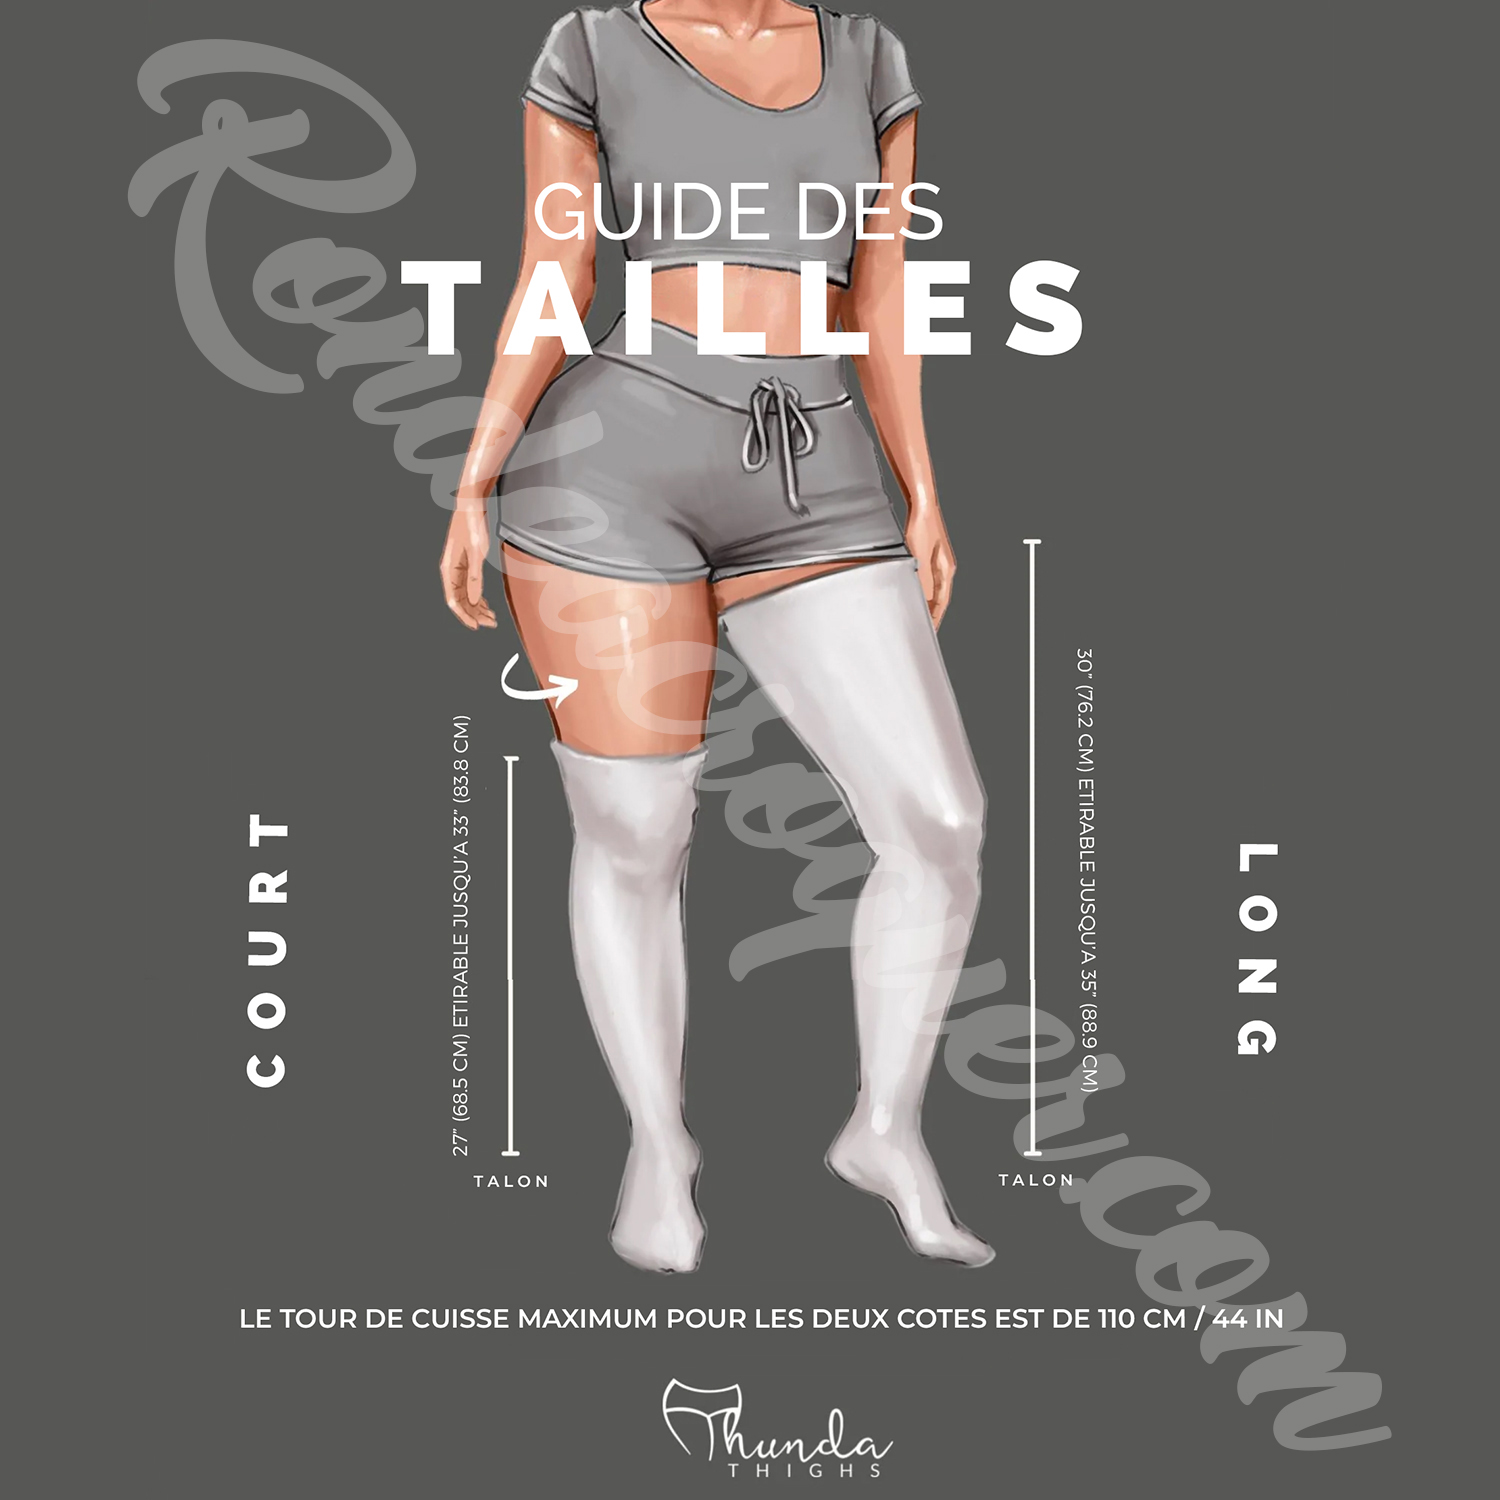 guide des tailles Thunda thighs